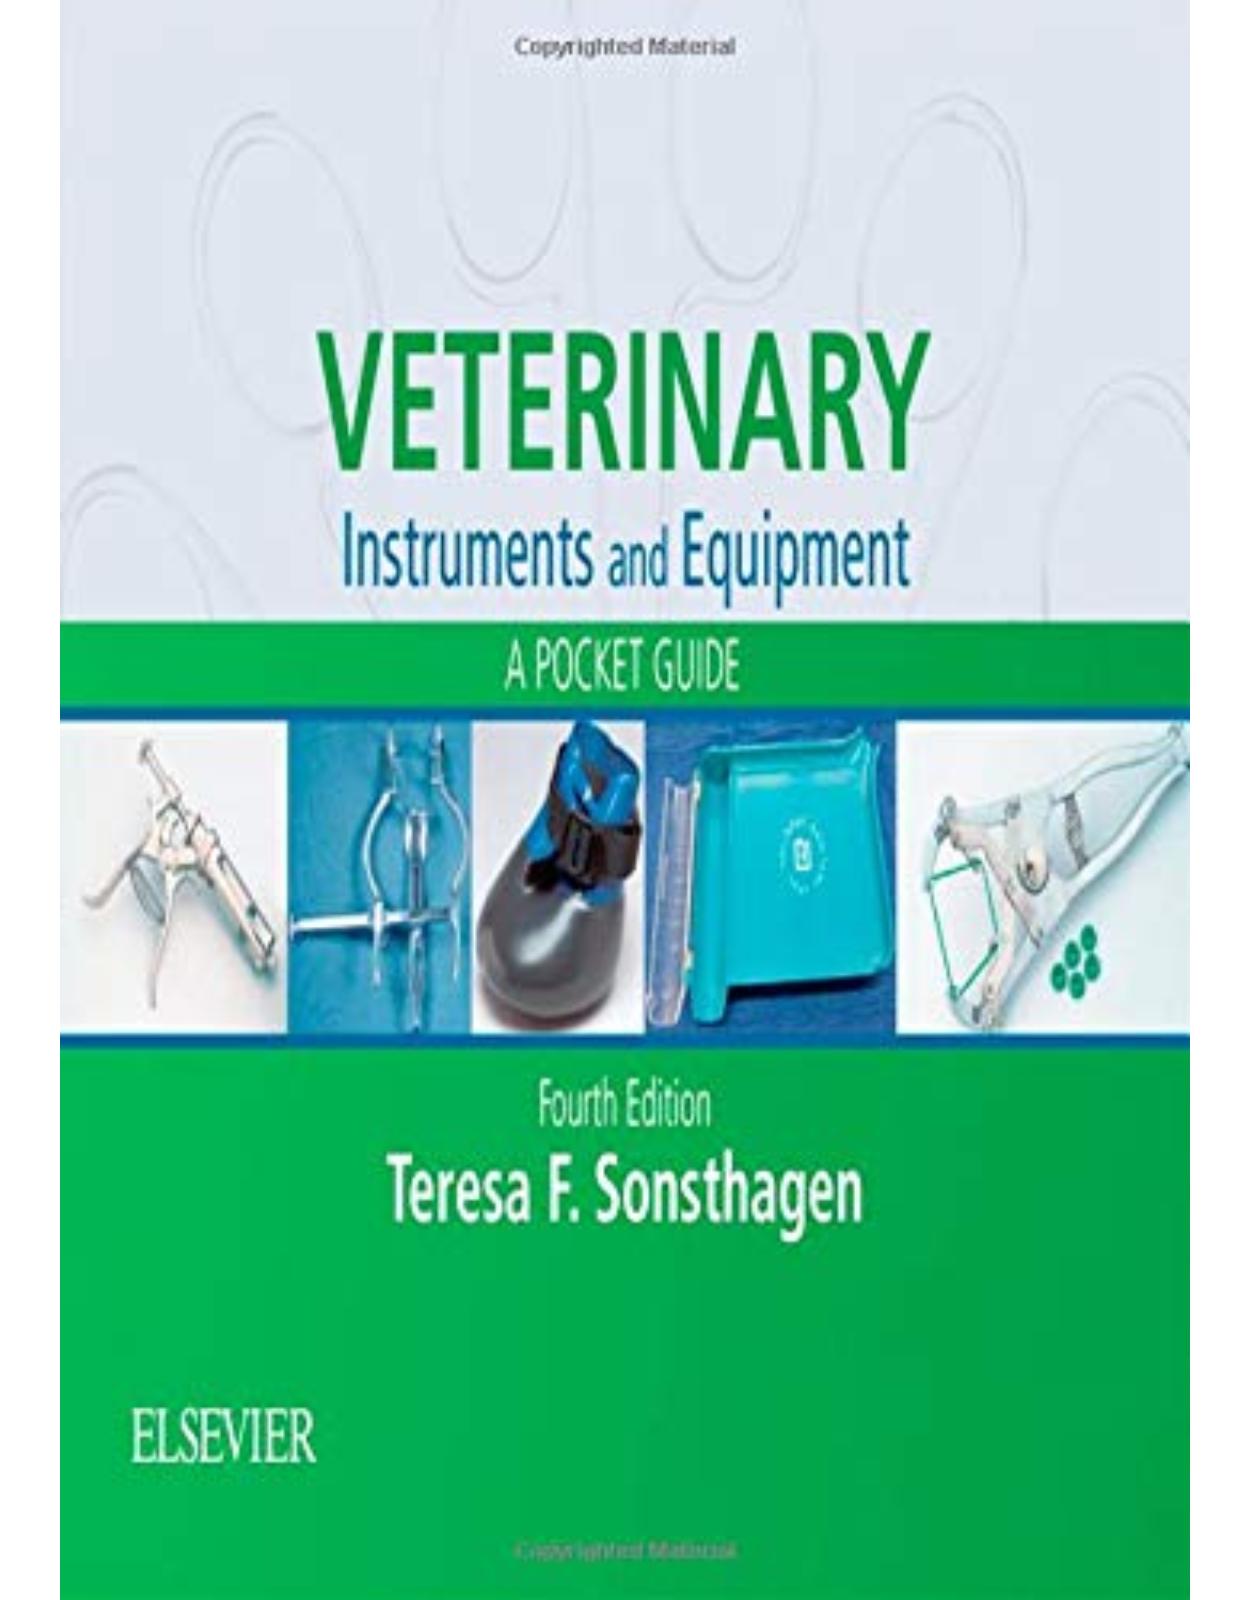 Veterinary Instruments and Equipment: A Pocket Guide, 4e 